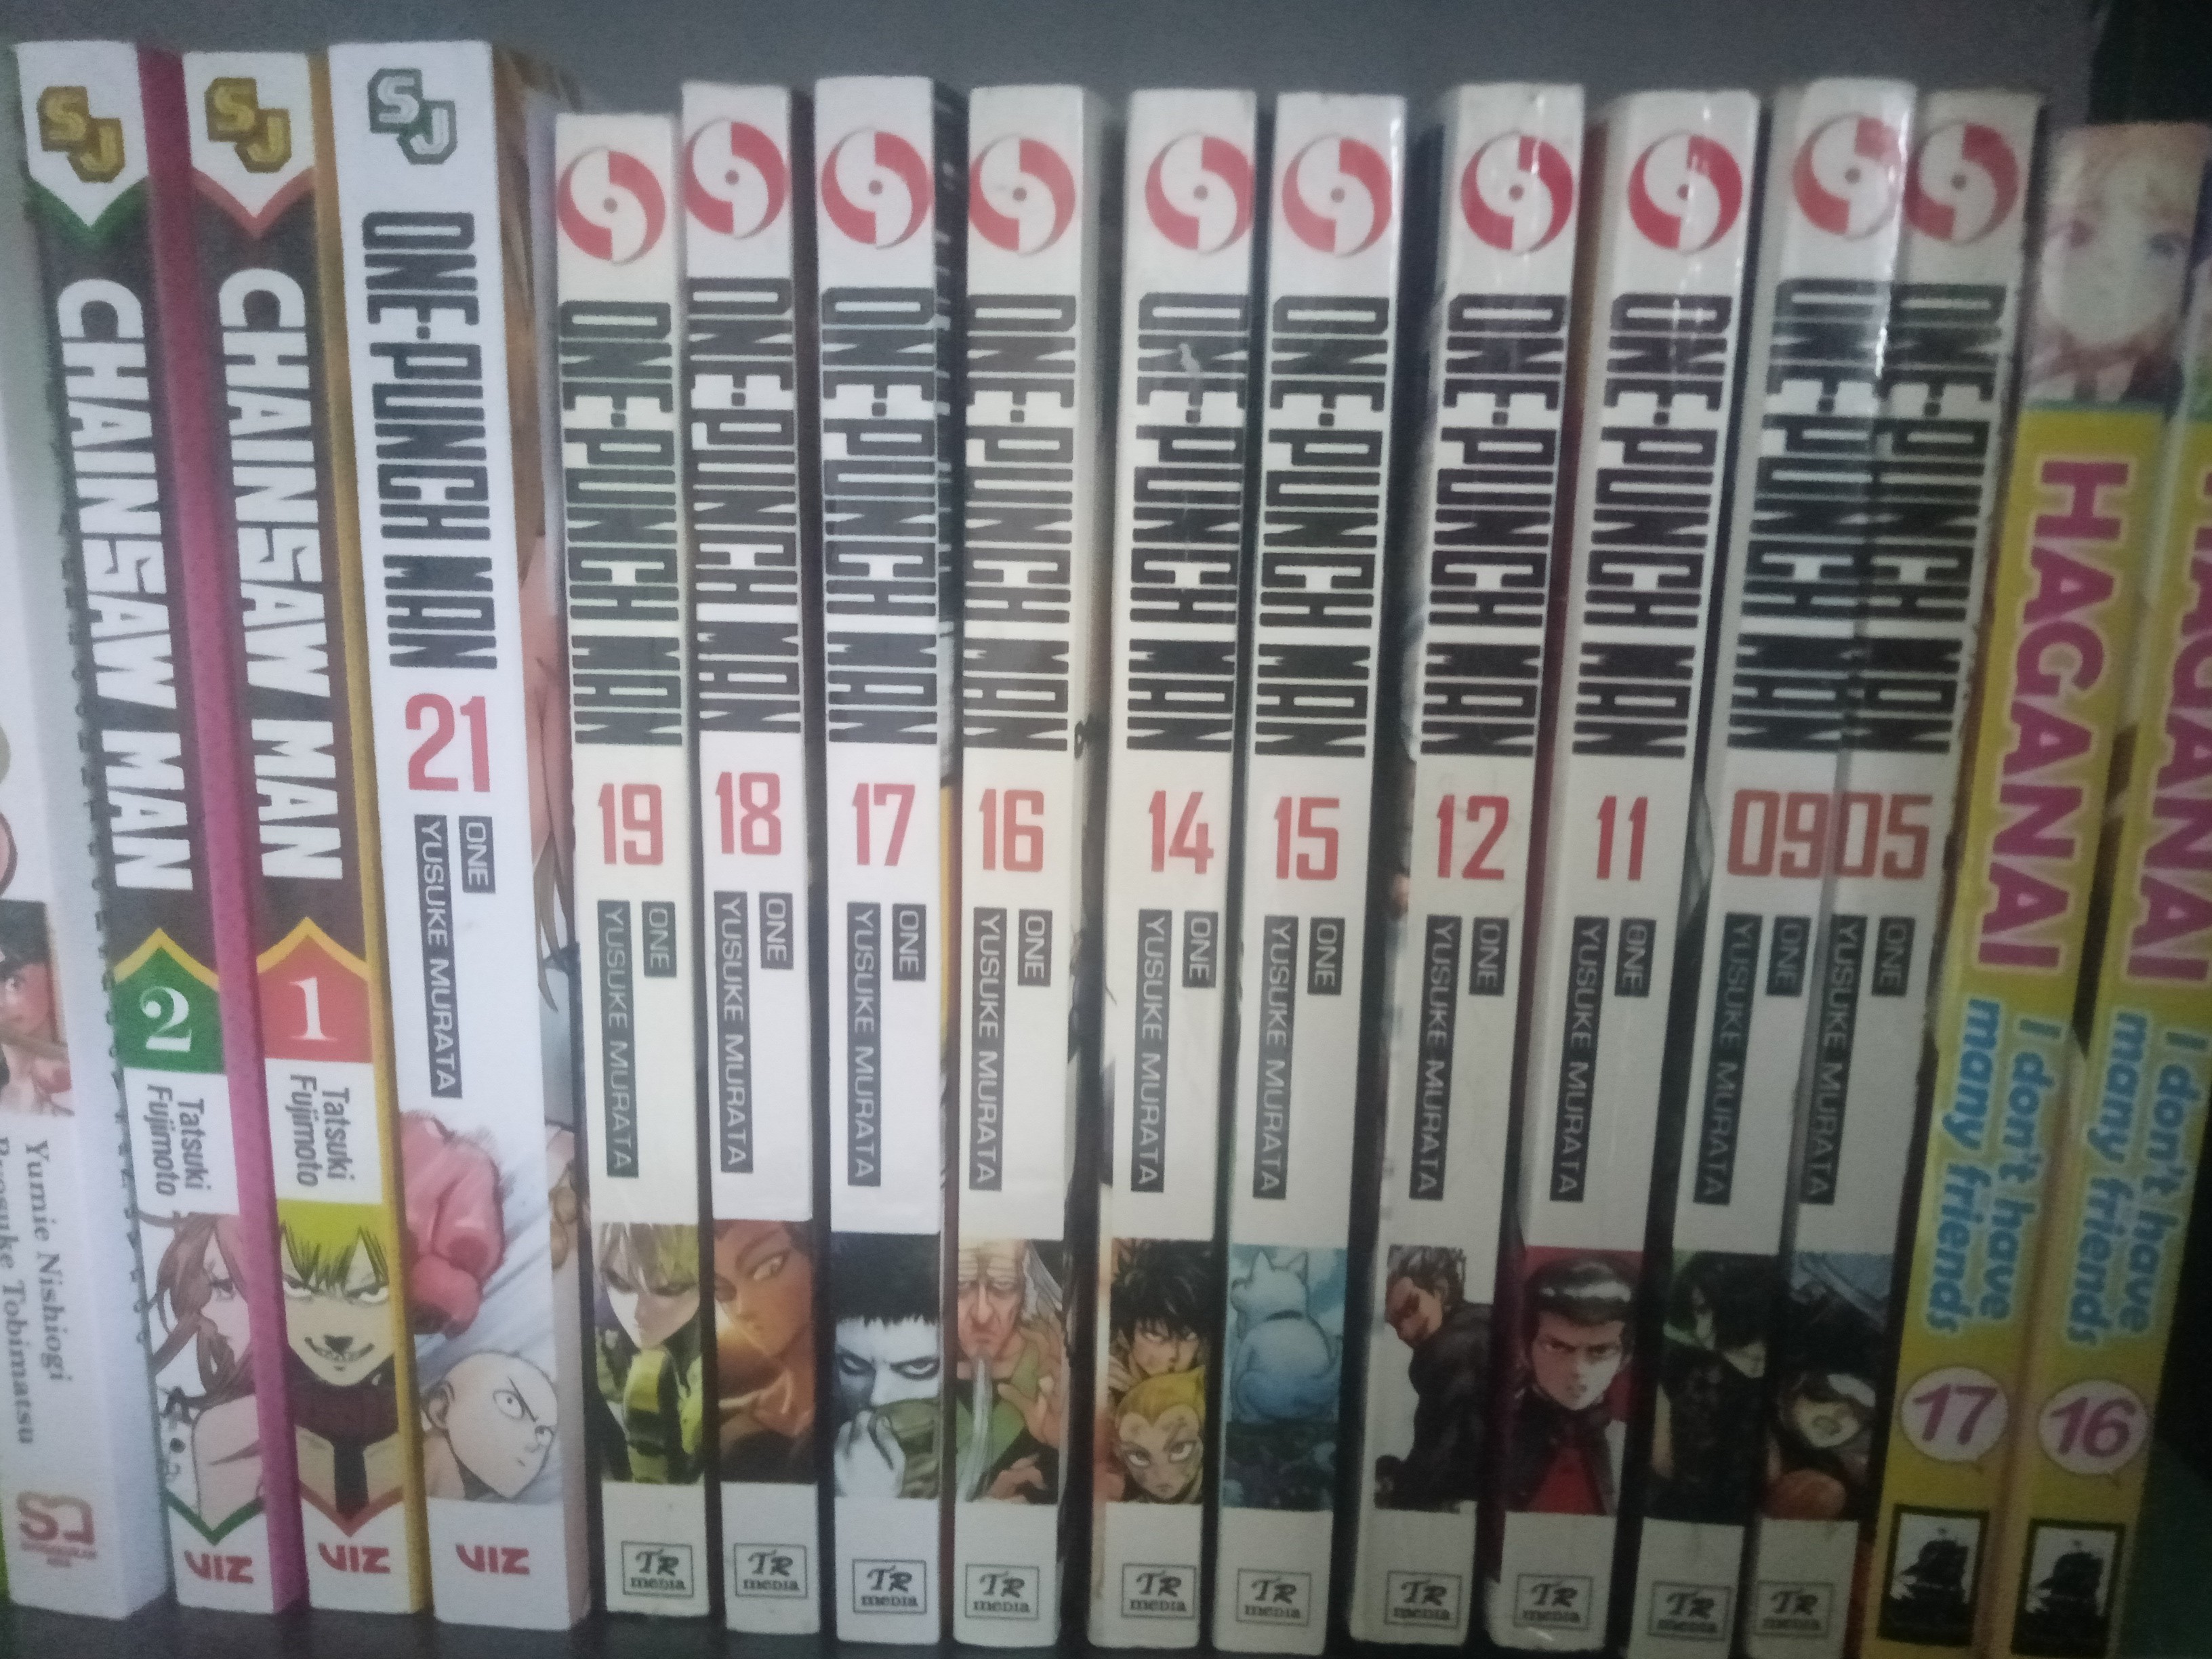 One-Punch Man Volume 11,12,14,15,16,17,18,20,21,22,23,24 Collection 12